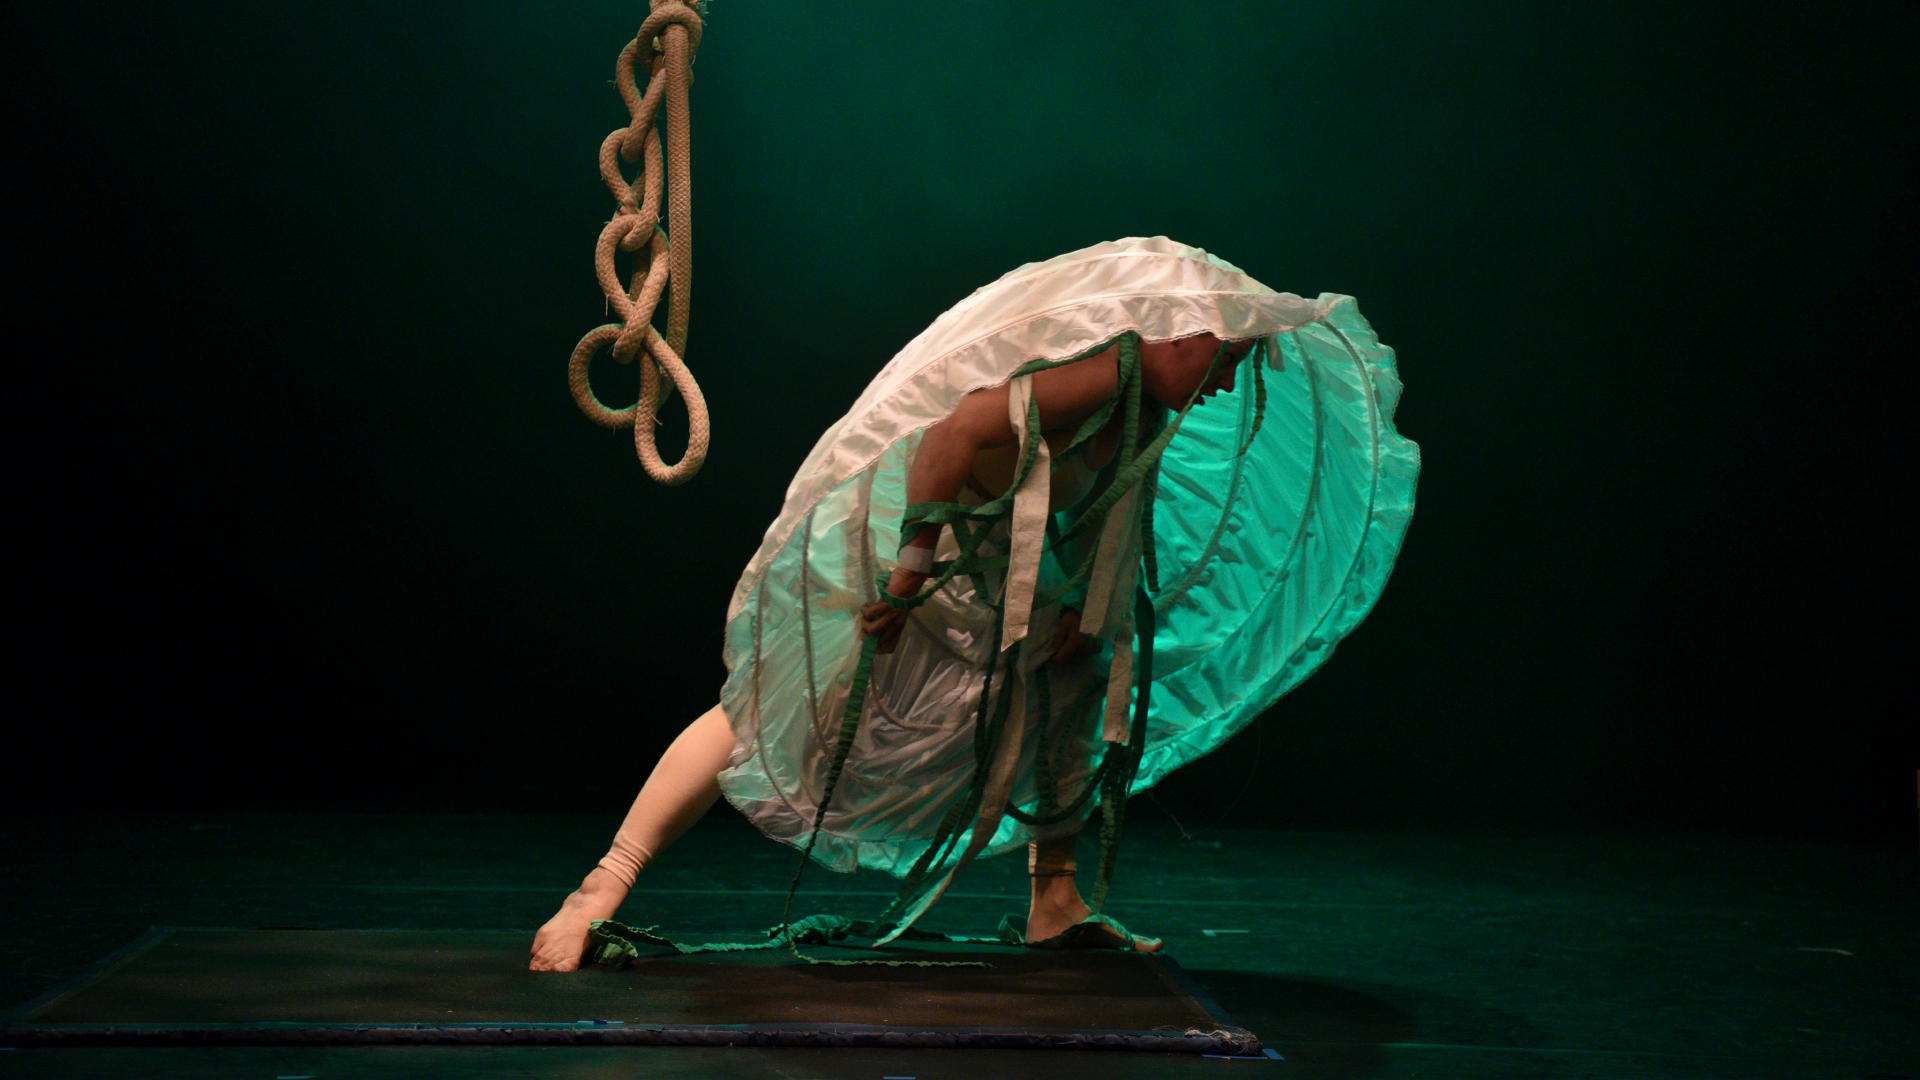 A person is crouching with an underskirt pulled over their head, a rope hangs in the background.